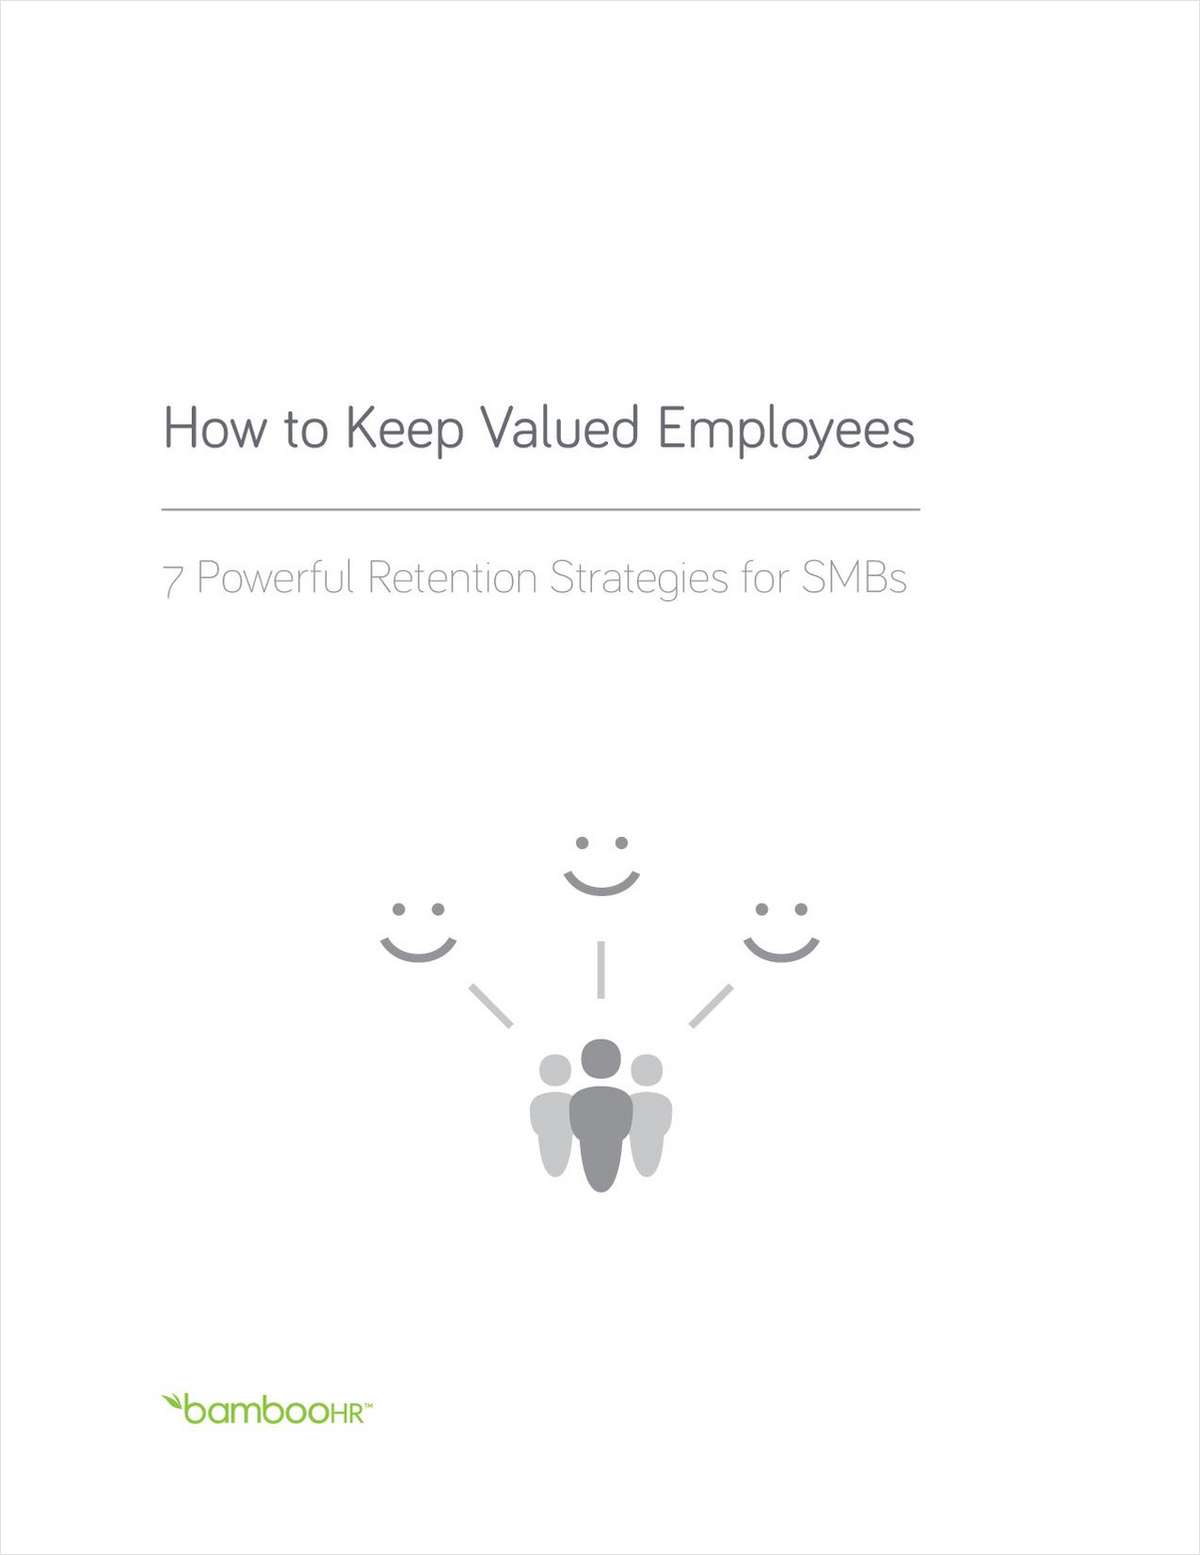 How to Keep Valued Employees: 7 Powerful Retention Strategies for SMBs